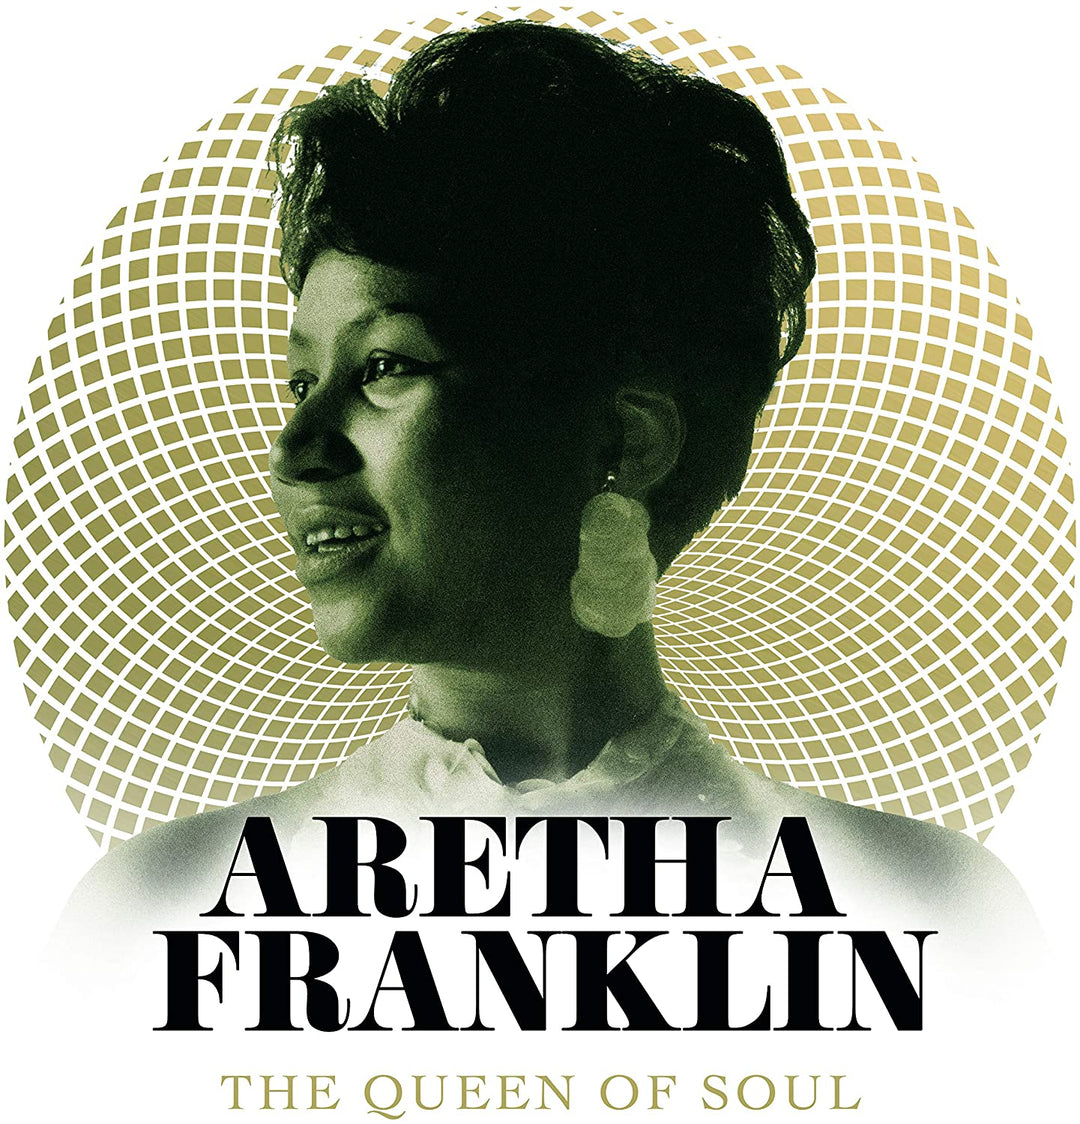 The Queen of Soul - Aretha Franklin [Audio CD]